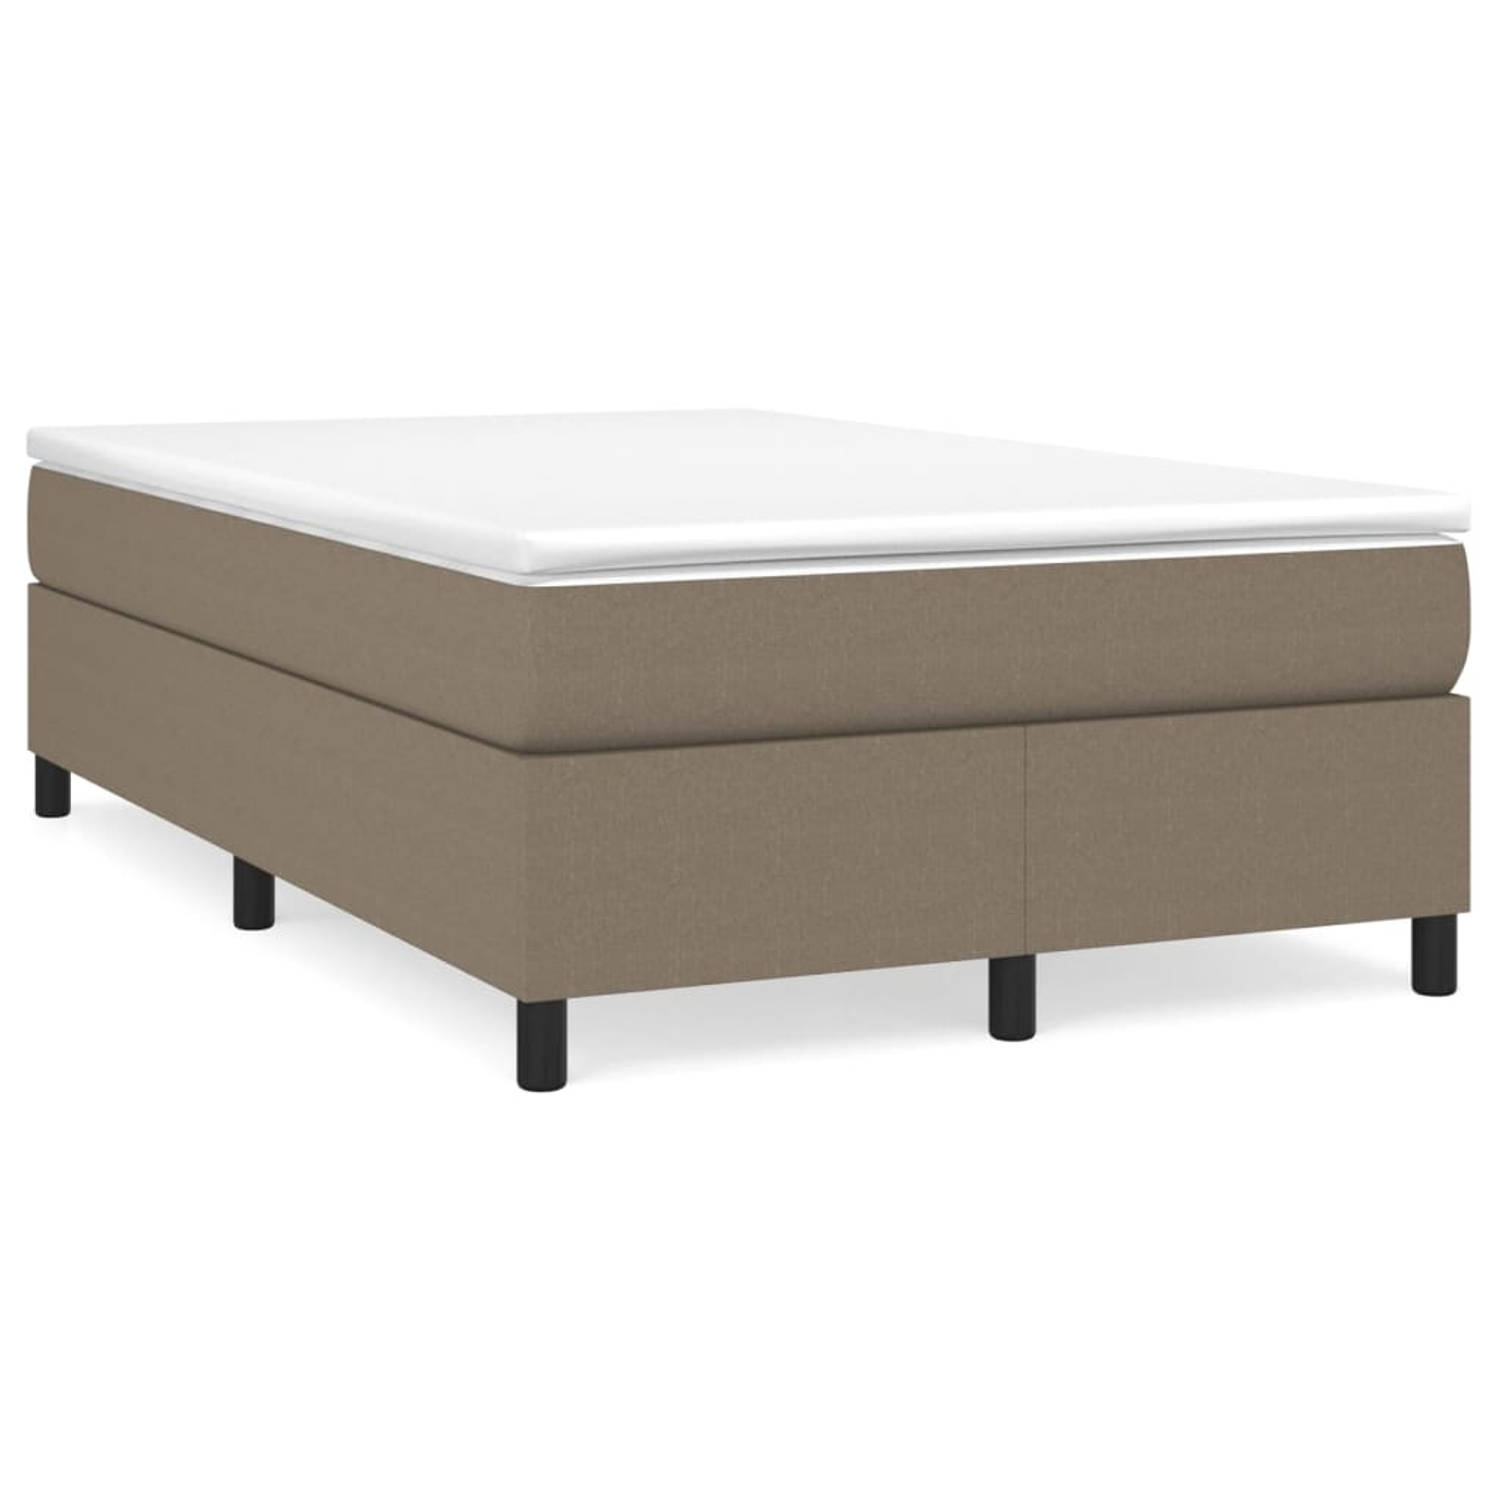 The Living Store Boxspringframe stof taupe 120x200 cm - Boxspringframe - Boxspringframes - Bed - Ledikant - Slaapmeubel - Bedframe - Bedbodem - Tweepersoonsbed - Boxspring - Bedden